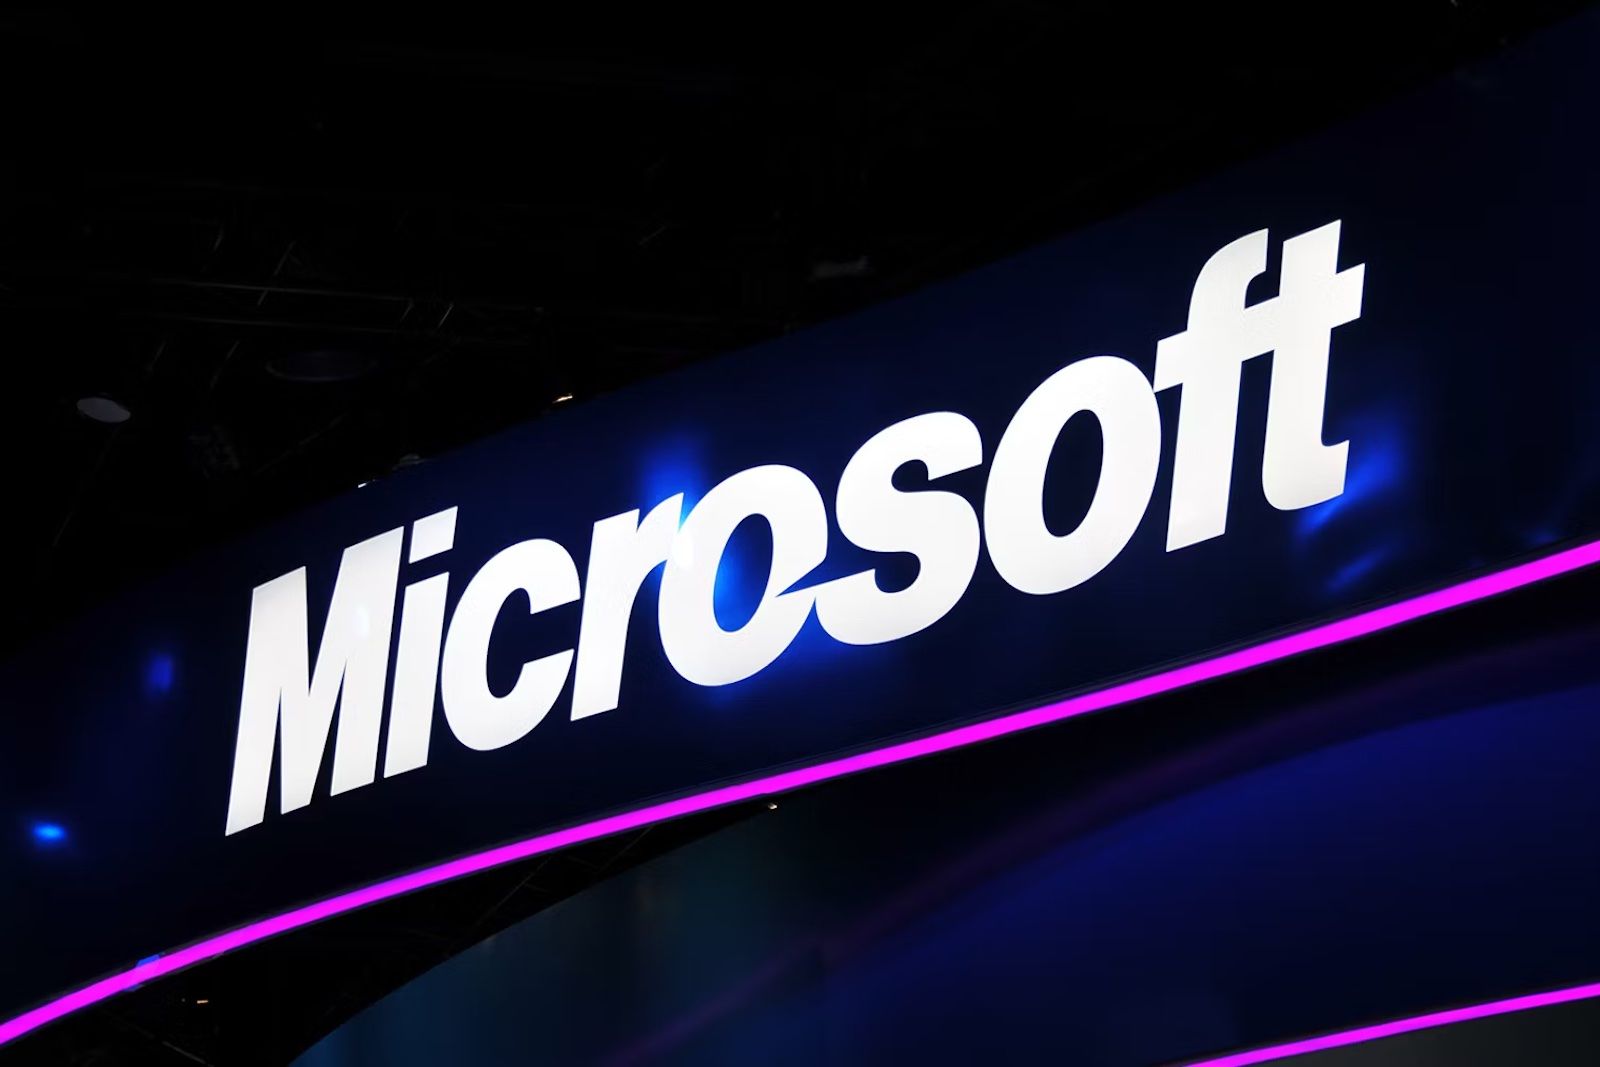 Microsoft is holding a secretive short-notice media event - what could it be about?